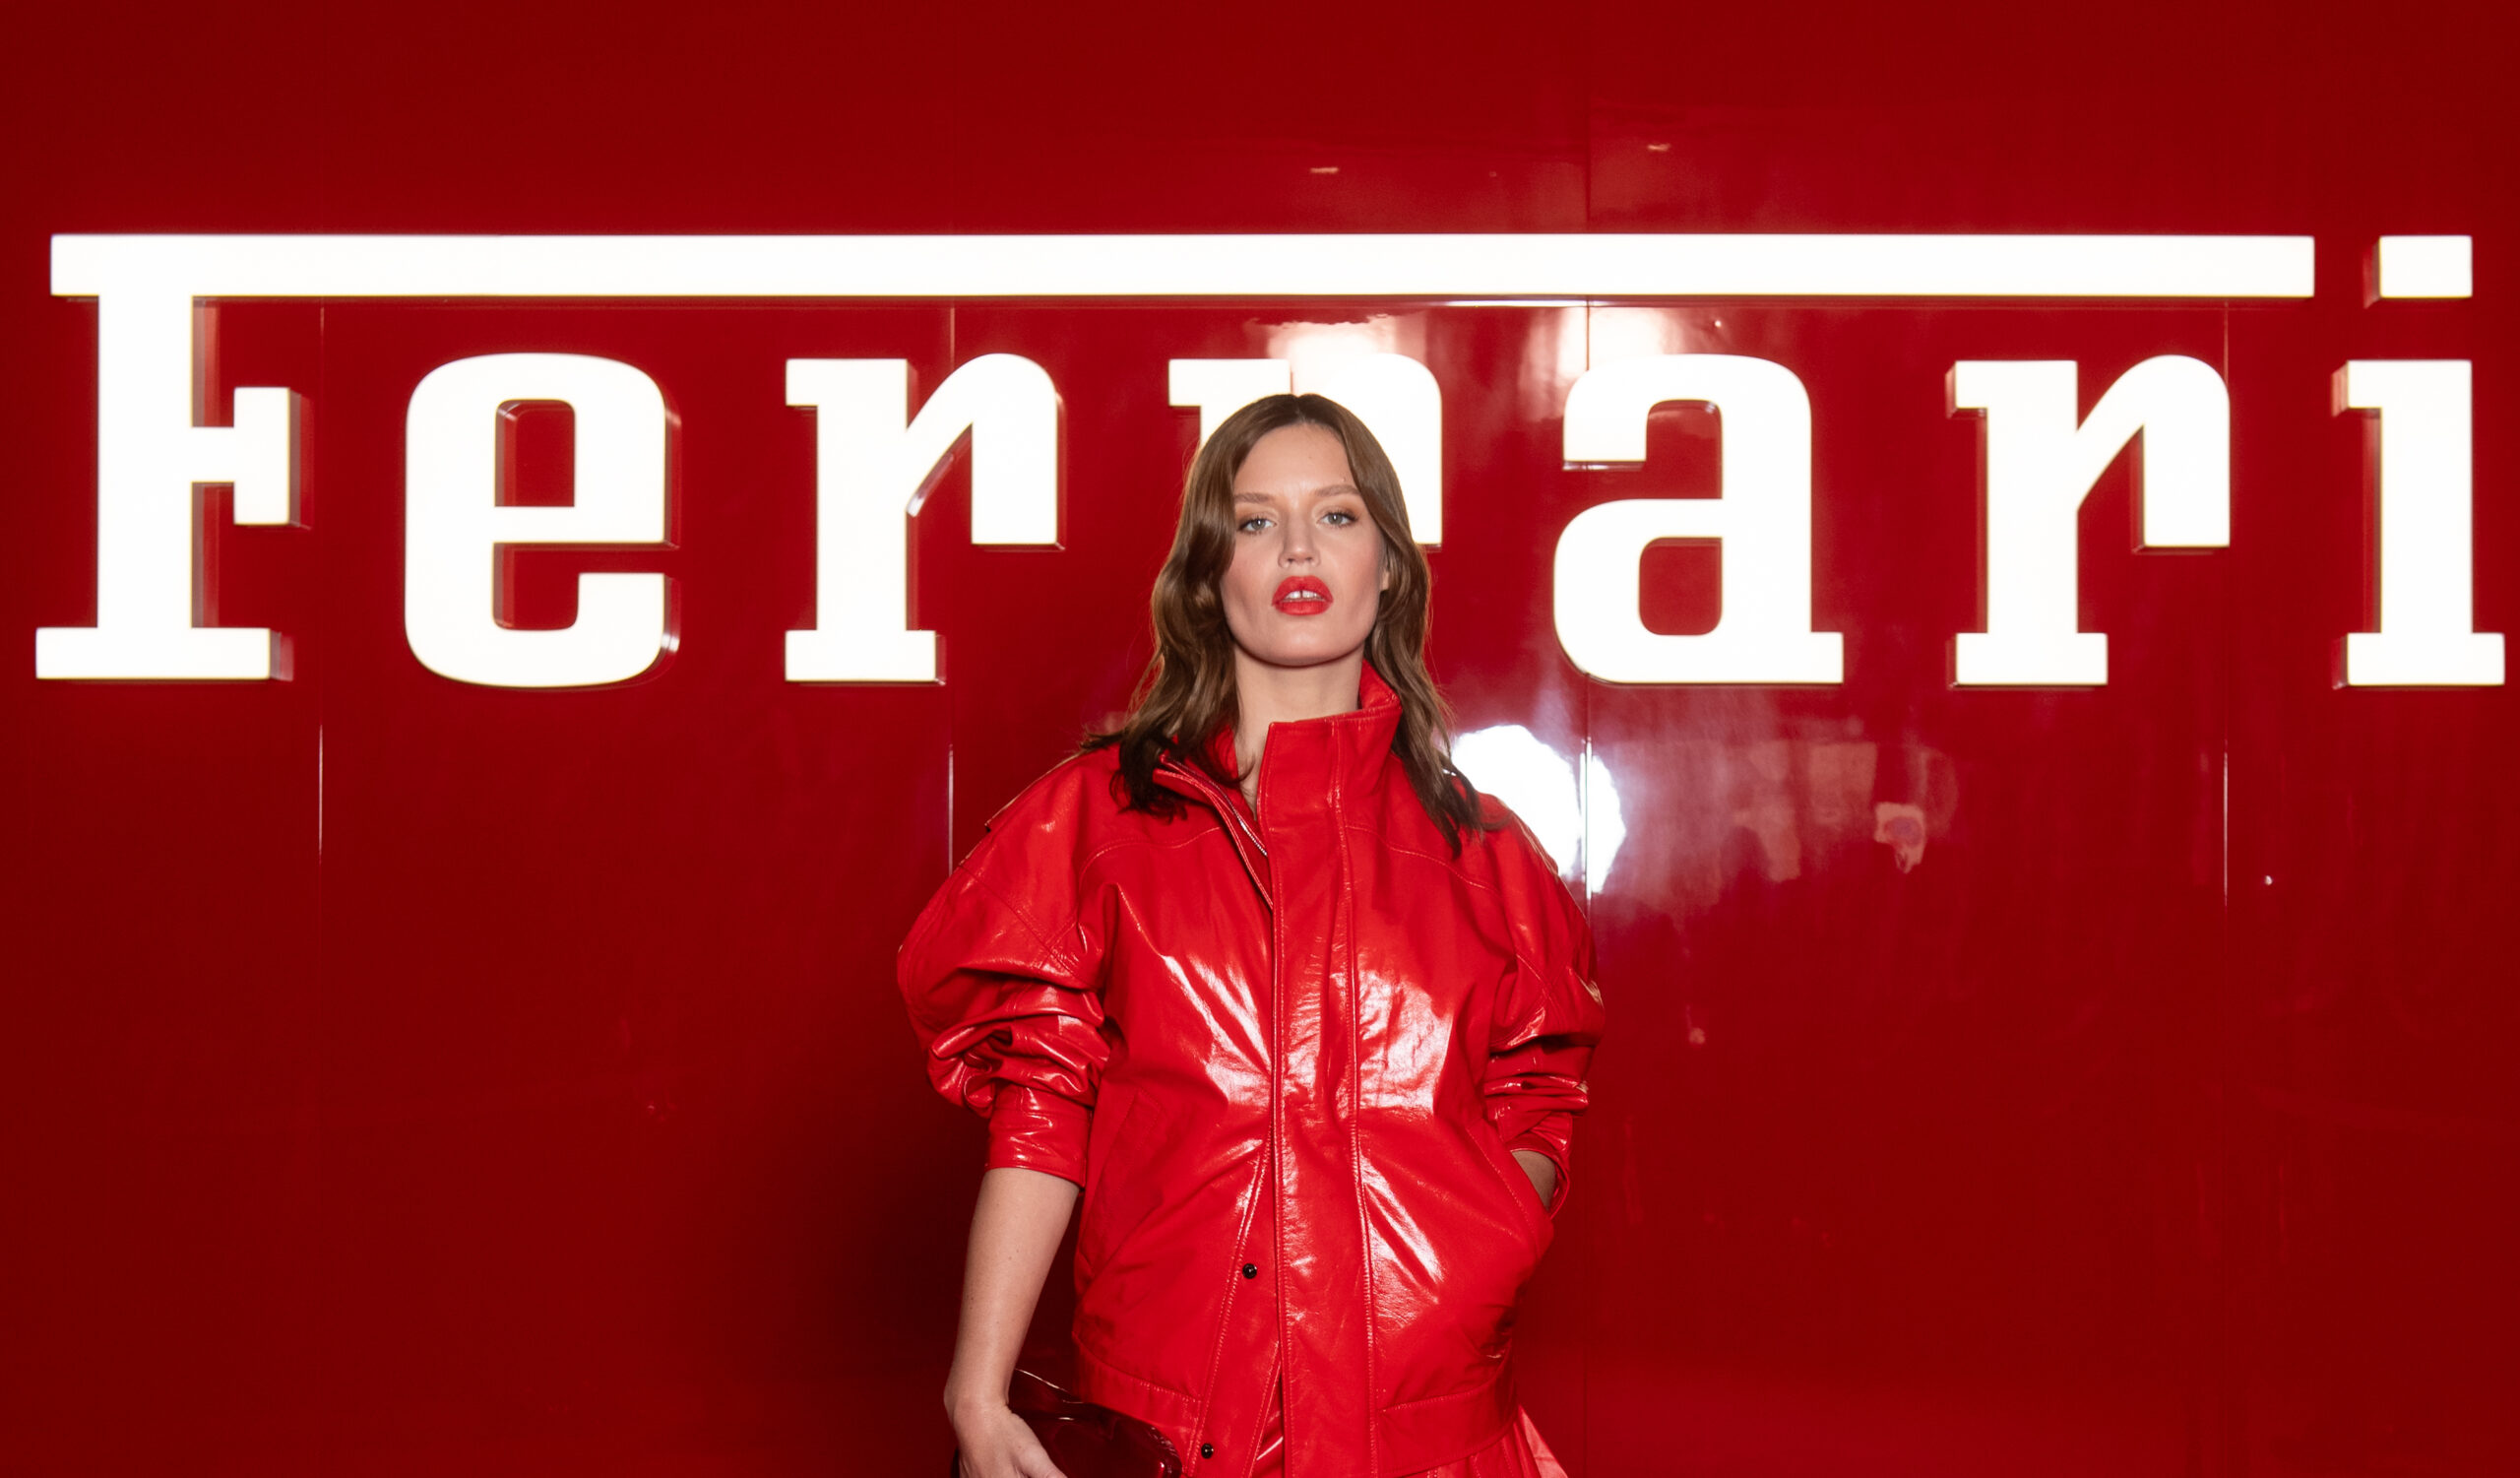 Georgia May Jagger stands confidently in front of a bold, red Ferrari backdrop, the brand name prominent above her head. She wears a vibrant red, shiny leather jacket that radiates luxury and style, complementing the backdrop and hinting at the fusion of high fashion and automotive excellence.